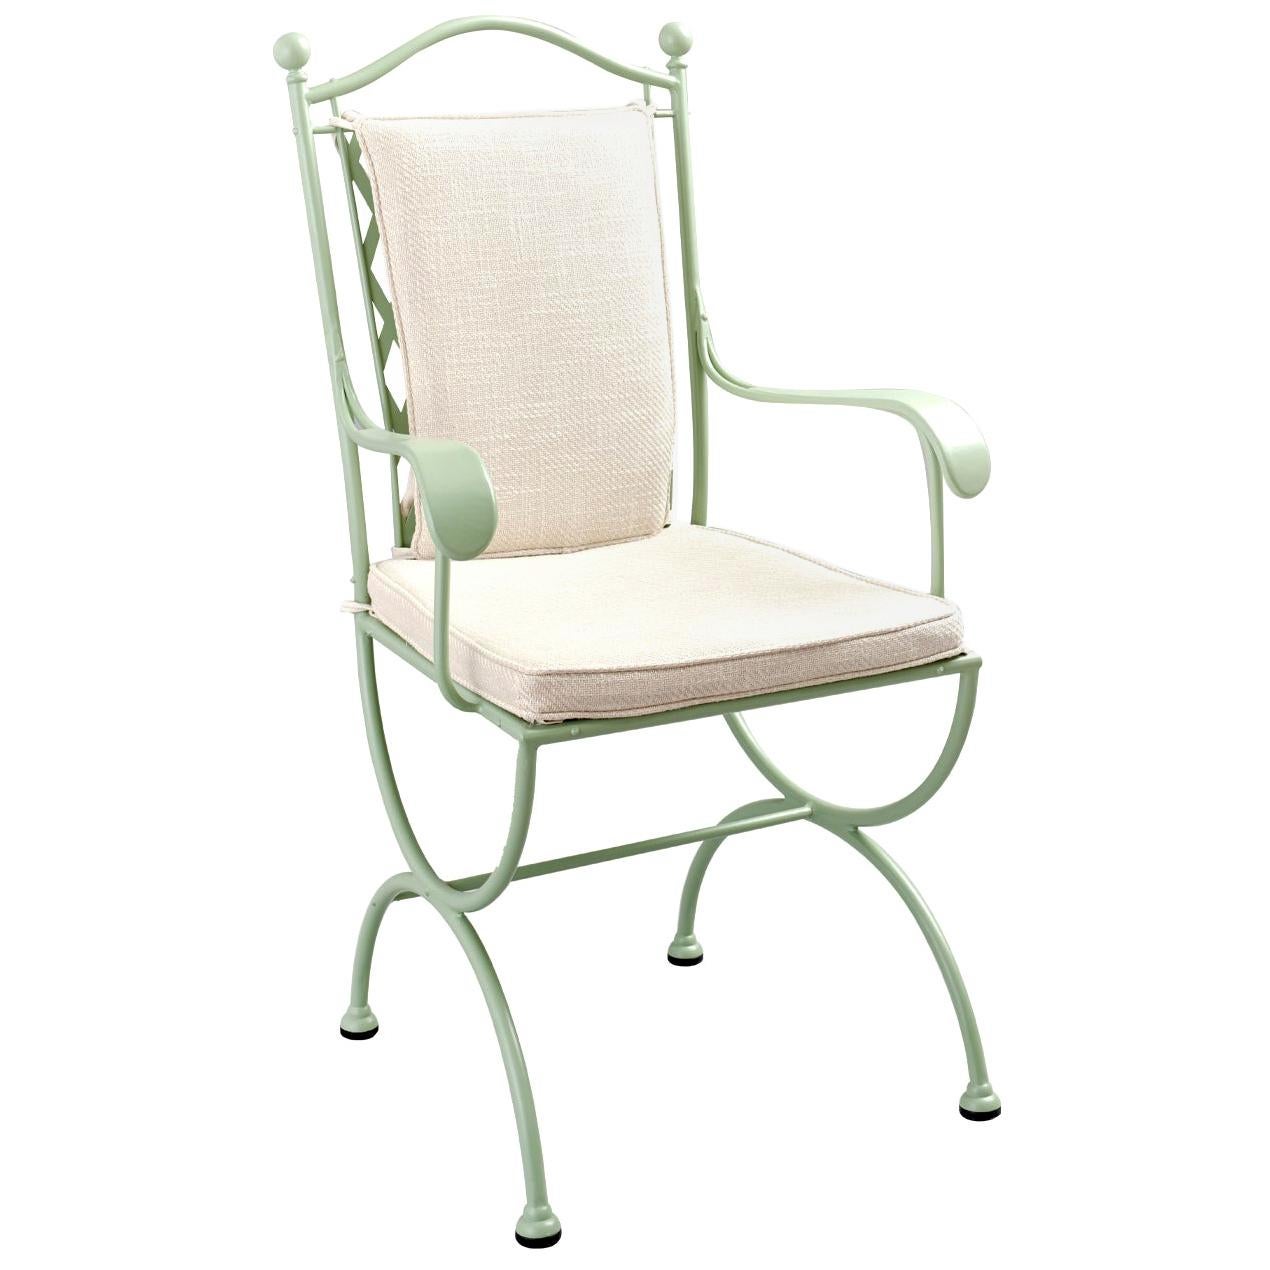 Rombo Outdoor Green Chair with Armrests